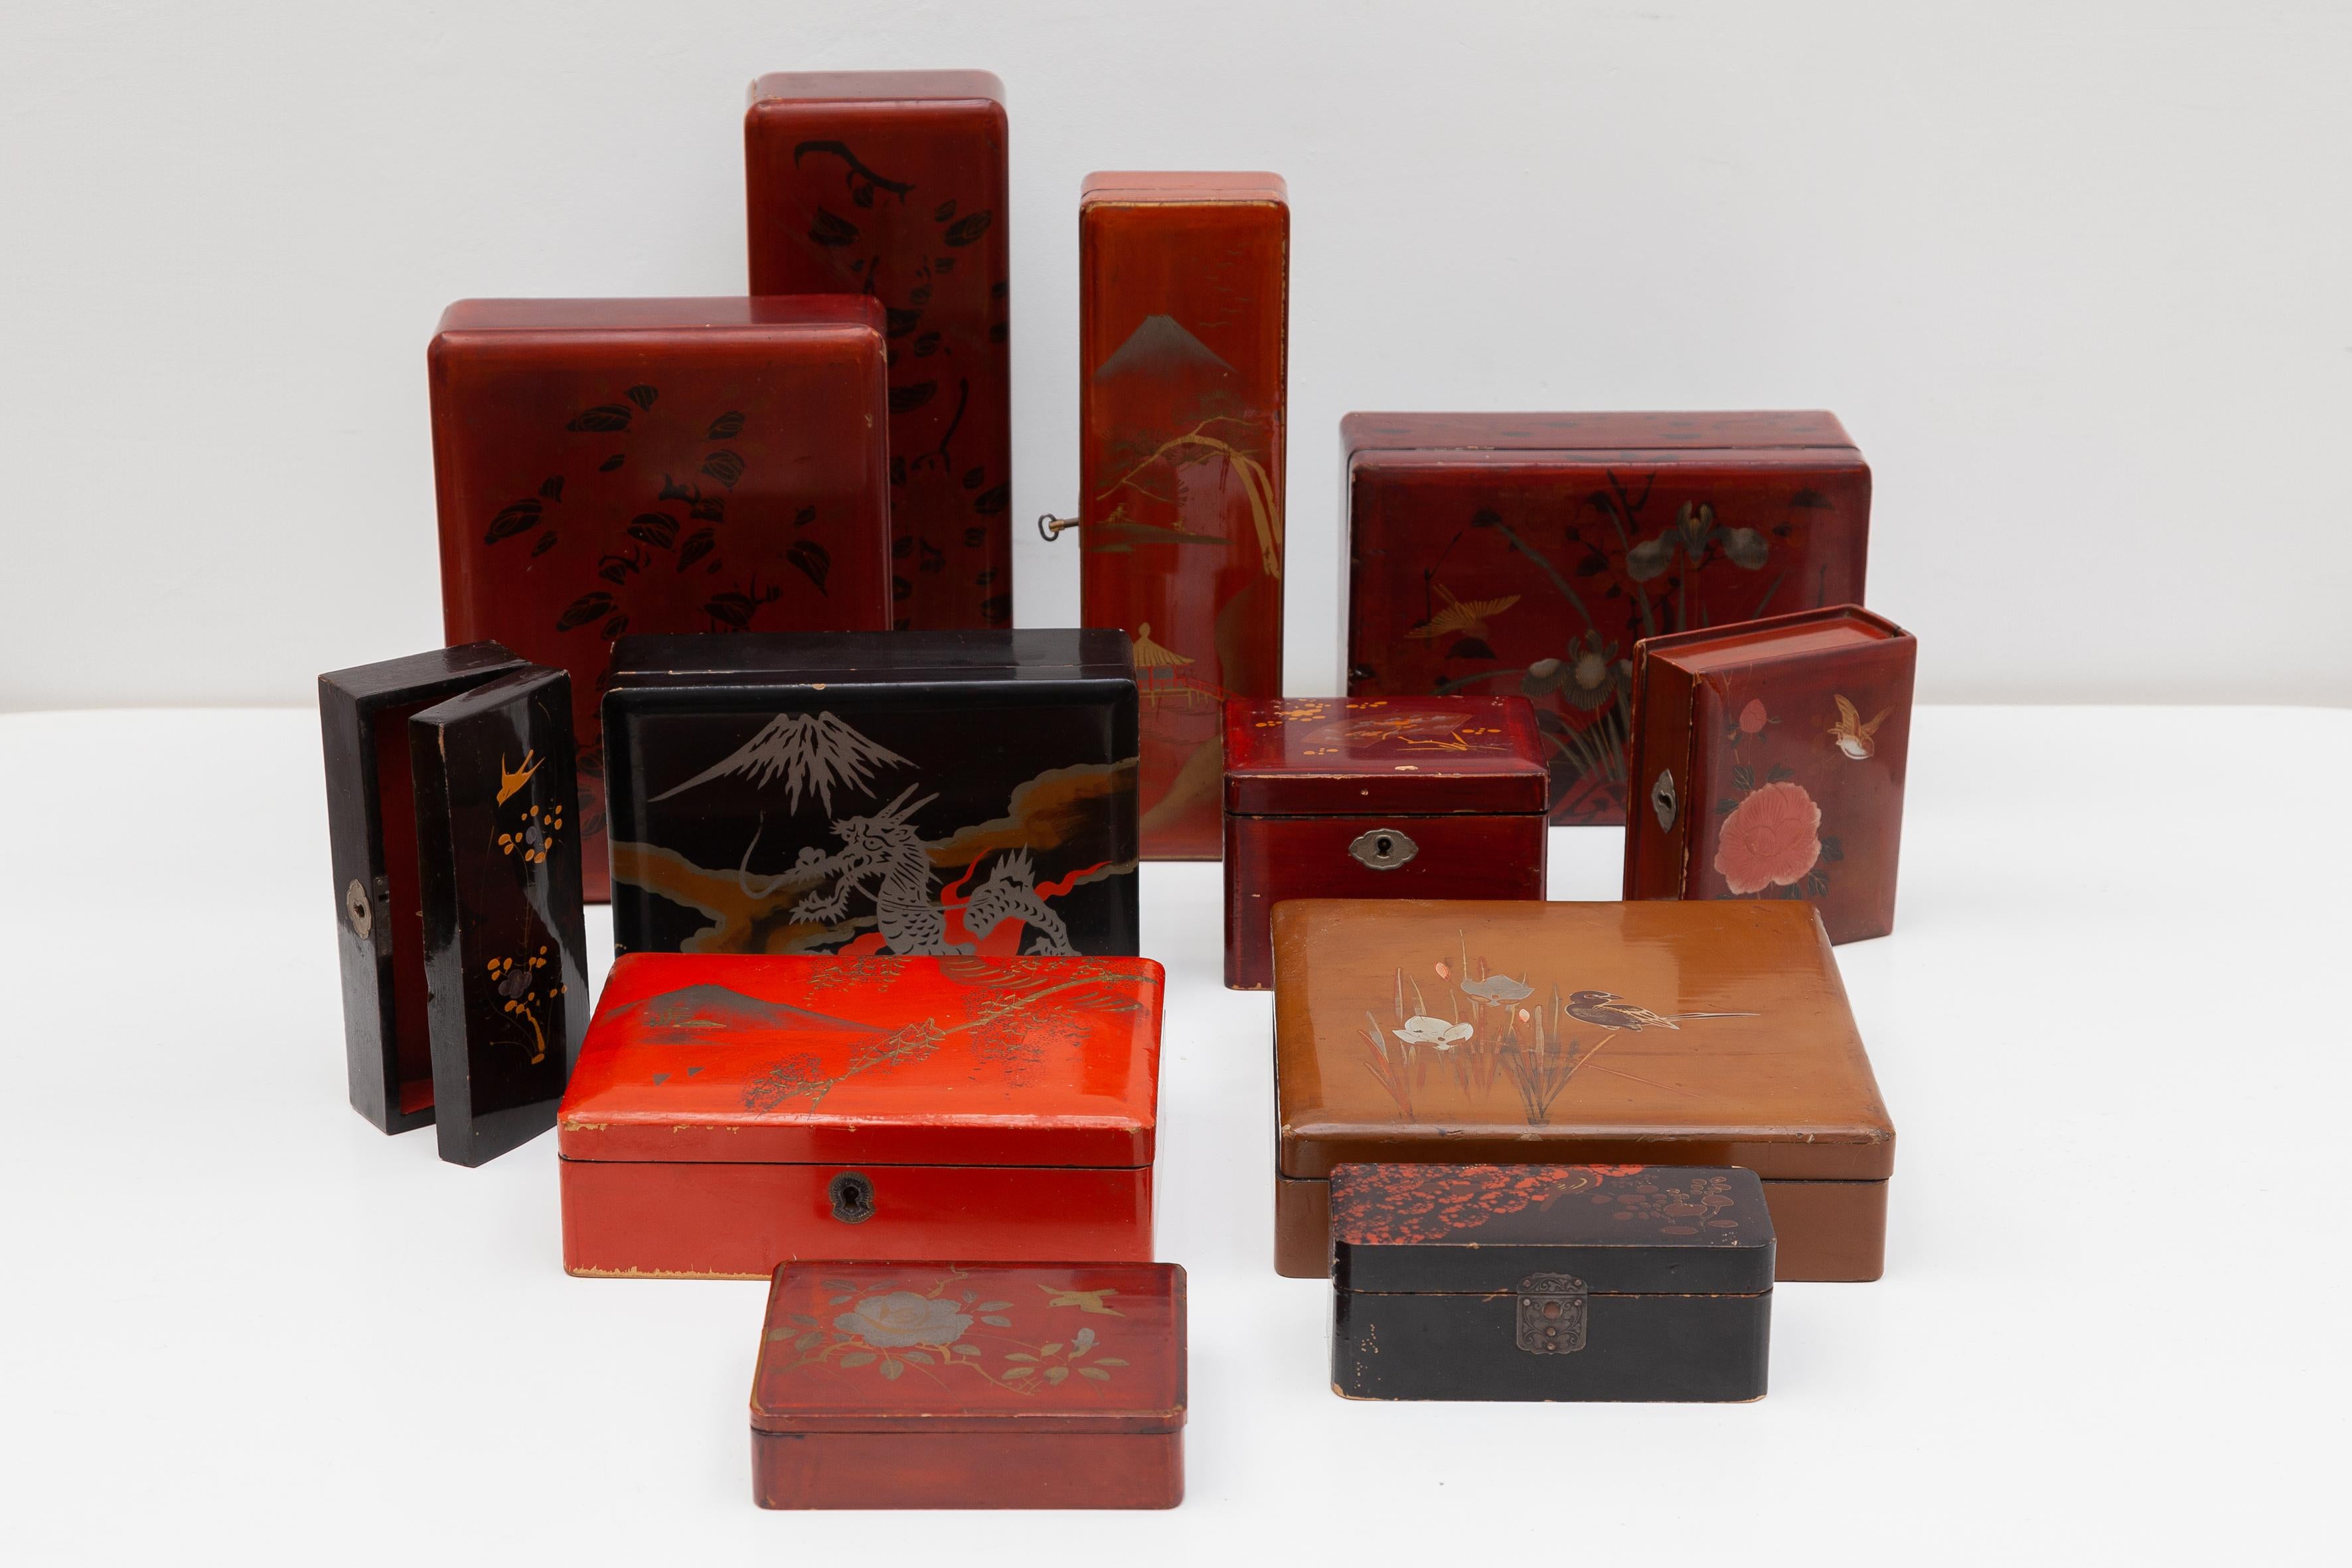 Beautiful collection of Japanese selected tea and jewelry boxes dated around 1900 and made of black and red lacquered wood, Taisho period, decorated with gilt flowers, birds, dragon, foliages and Japanese landscape, hand crafted in Japan and signs.